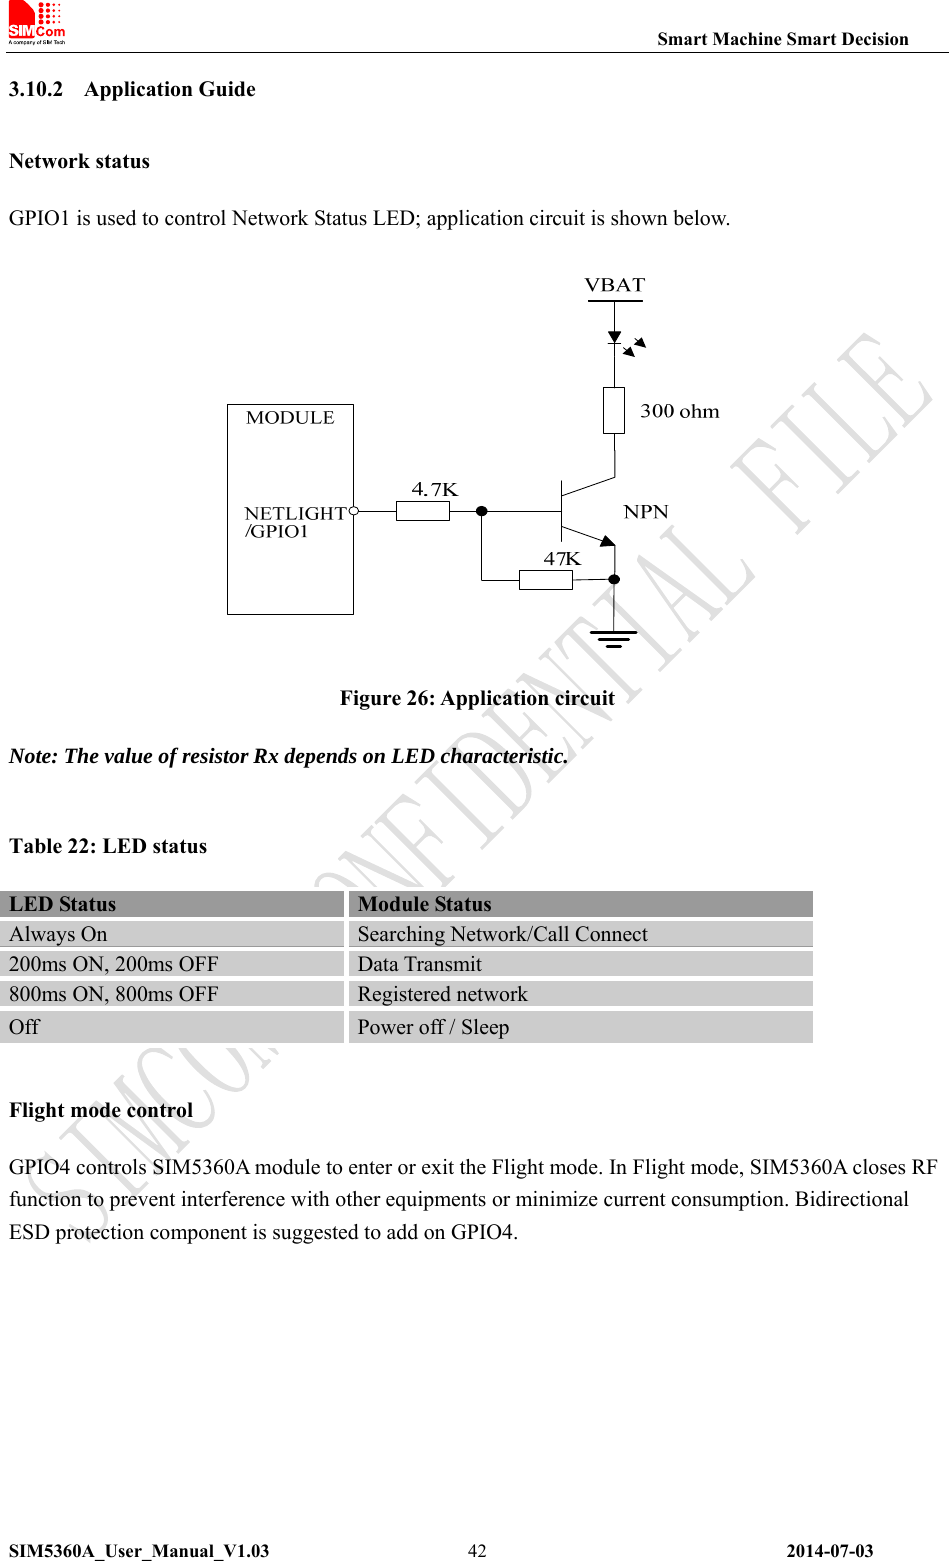                                                                Smart Machine Smart Decision SIM5360A_User_Manual_V1.03                 2014-07-03 423.10.2 Application Guide Network status GPIO1 is used to control Network Status LED; application circuit is shown below.   Figure 26: Application circuit Note: The value of resistor Rx depends on LED characteristic.  Table 22: LED status LED Status    Module Status Always On  Searching Network/Call Connect 200ms ON, 200ms OFF  Data Transmit 800ms ON, 800ms OFF  Registered network Off  Power off / Sleep   Flight mode control GPIO4 controls SIM5360A module to enter or exit the Flight mode. In Flight mode, SIM5360A closes RF function to prevent interference with other equipments or minimize current consumption. Bidirectional ESD protection component is suggested to add on GPIO4.  